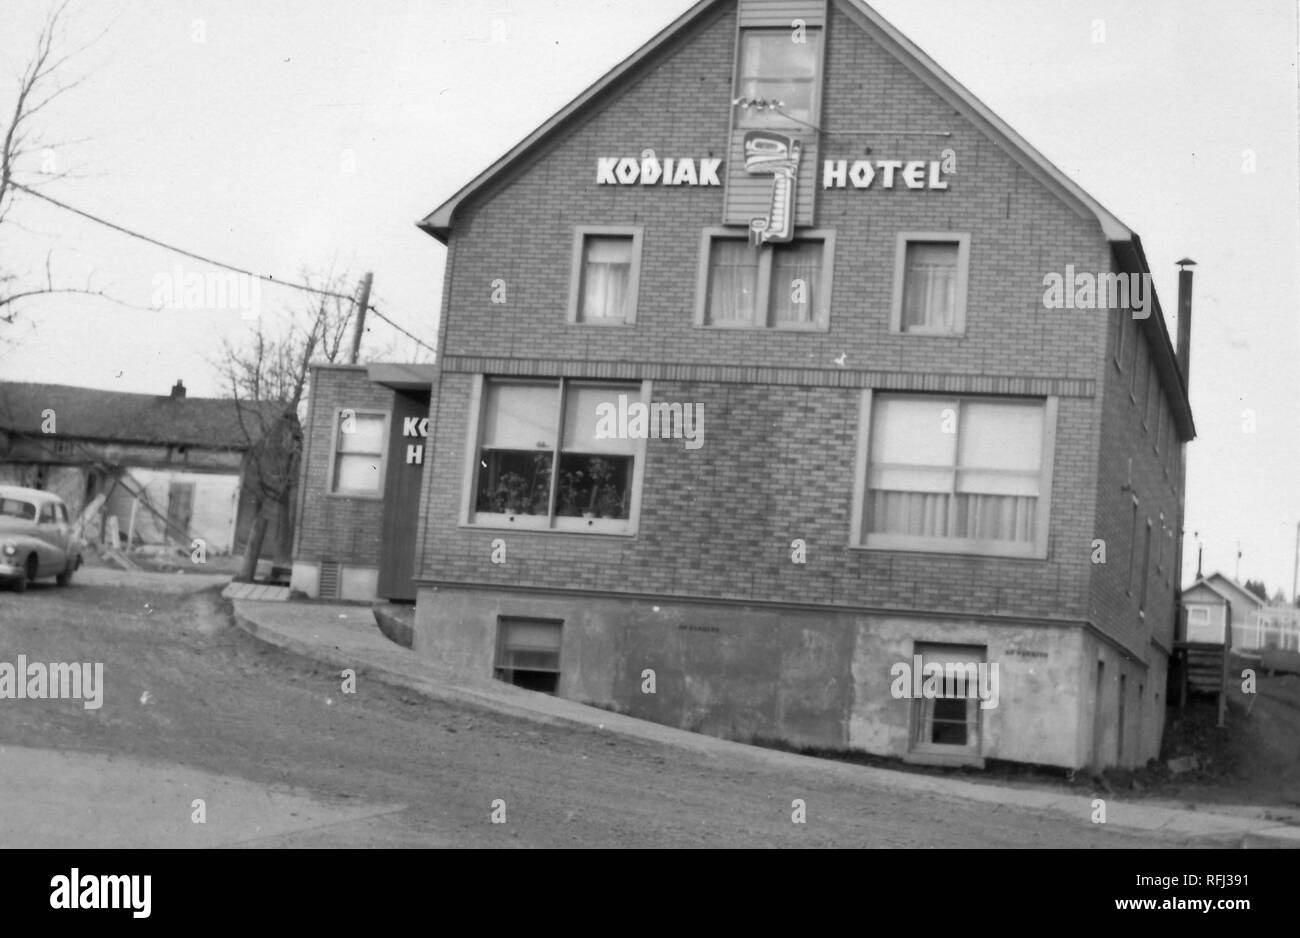 Black and white photograph shot on a slight angle, of a multi-level building with a brick facade, with the sign 'Kodiak Hotel' visible in the gable space, and several more buildings visible in the background, photographed during a hunting and fishing trip located in Alaska, 1955. () Stock Photo